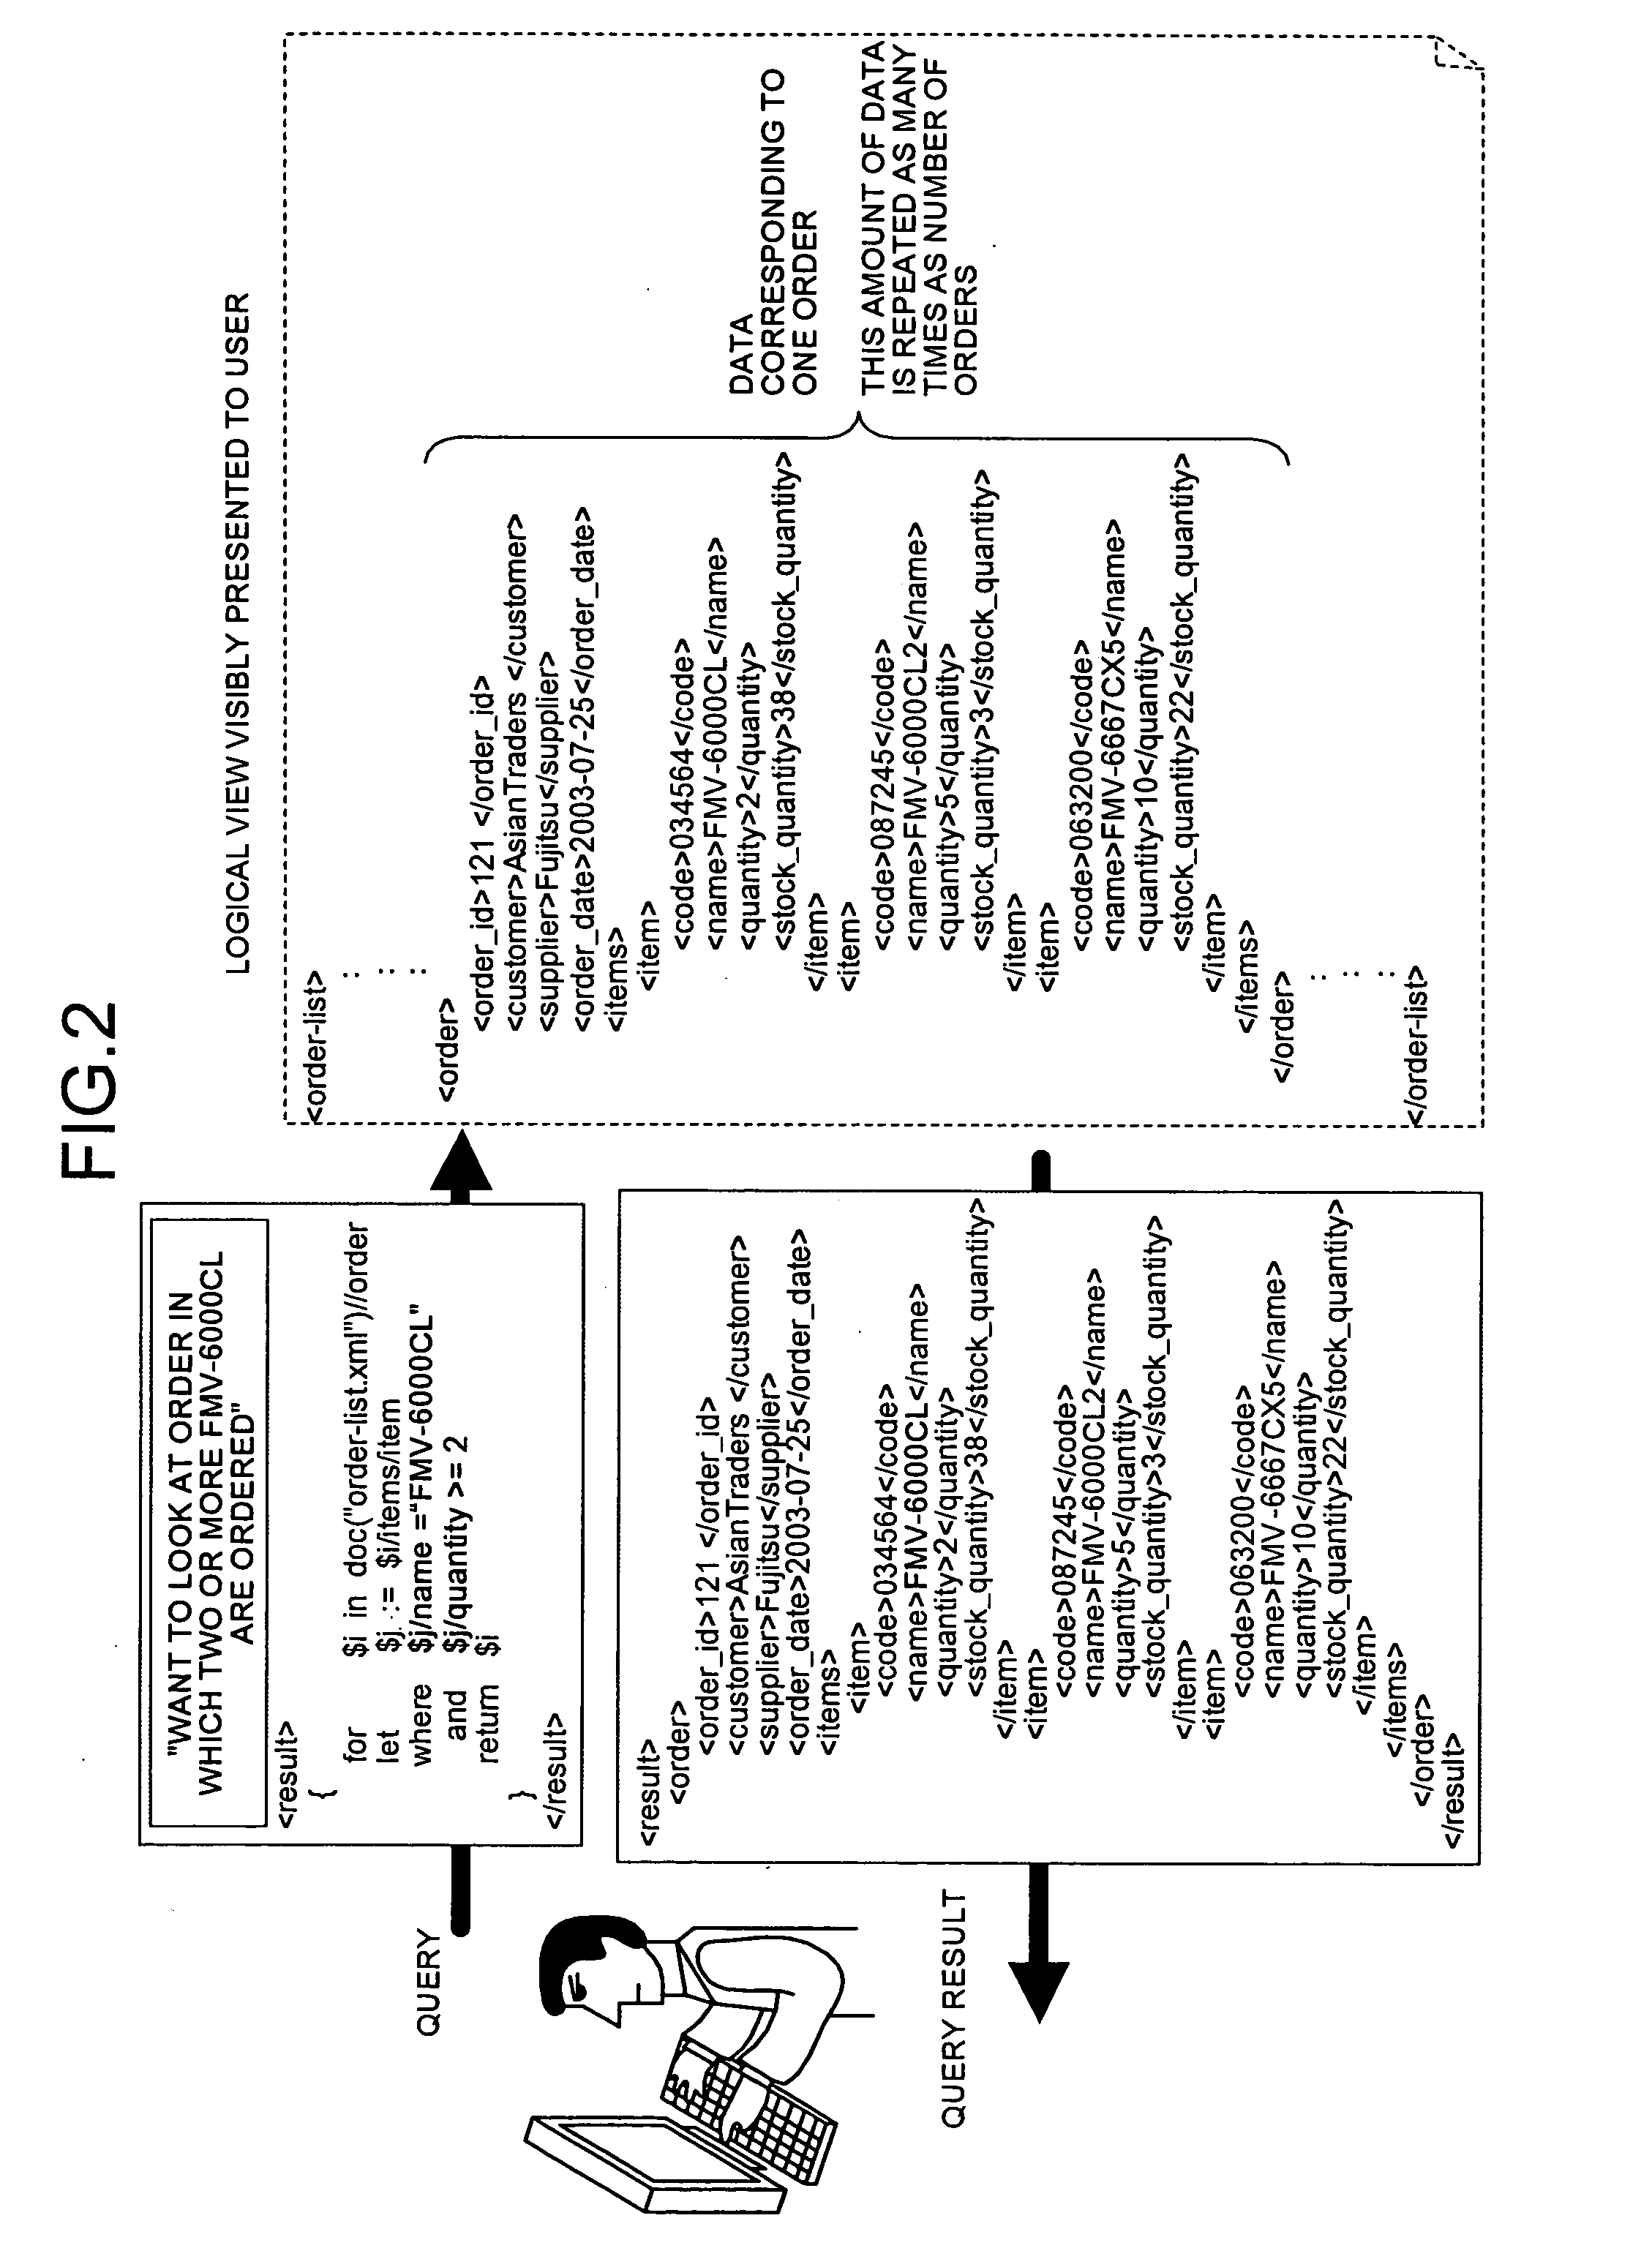 Computer product, database integration reference method, and database integration reference apparatus